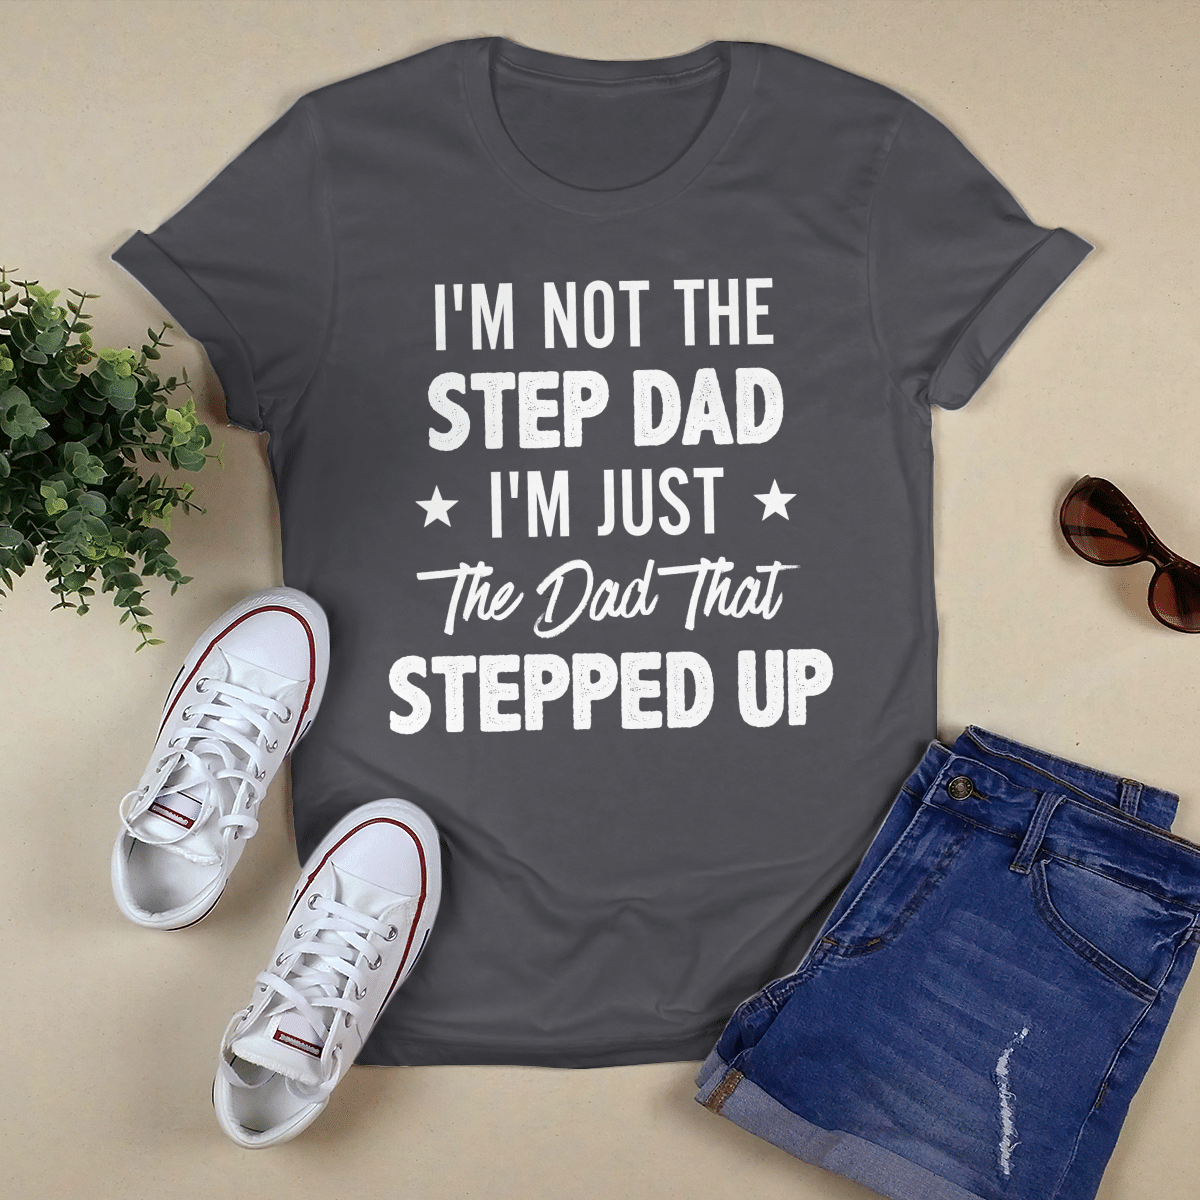 I_m Not The Step Dad shirt